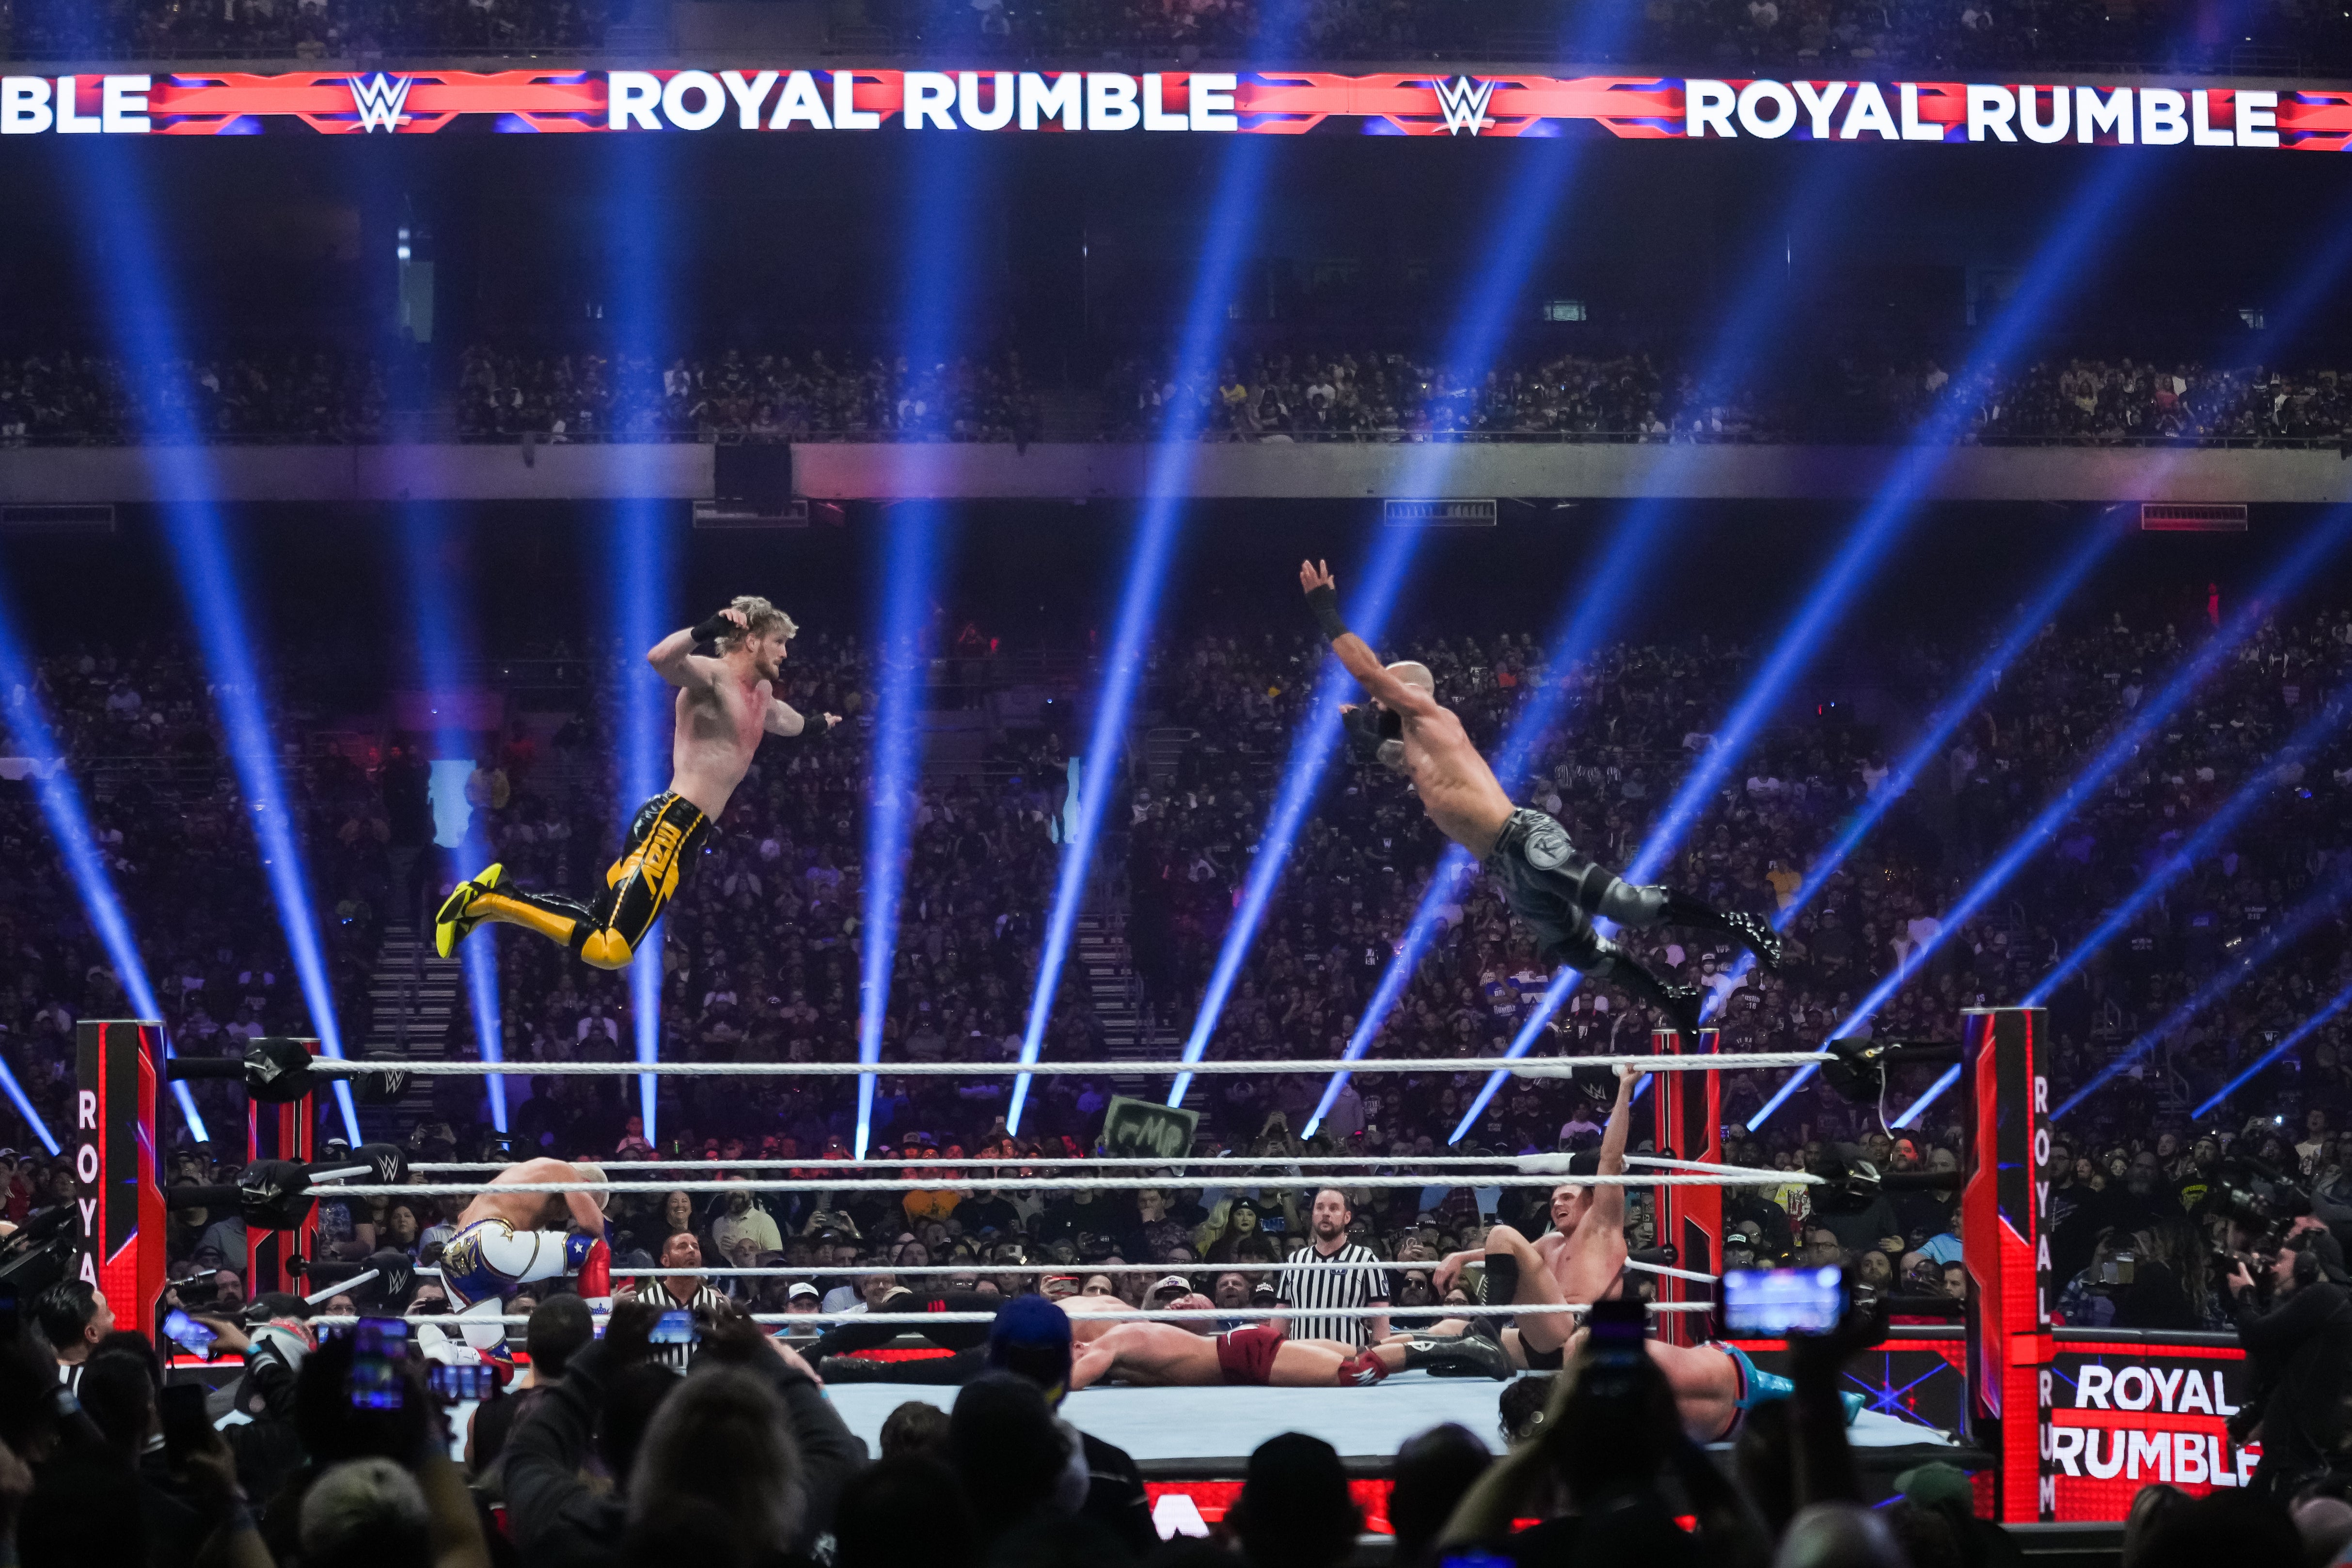 The Royal Rumble always provides a slew of iconic, highlight-reel moments